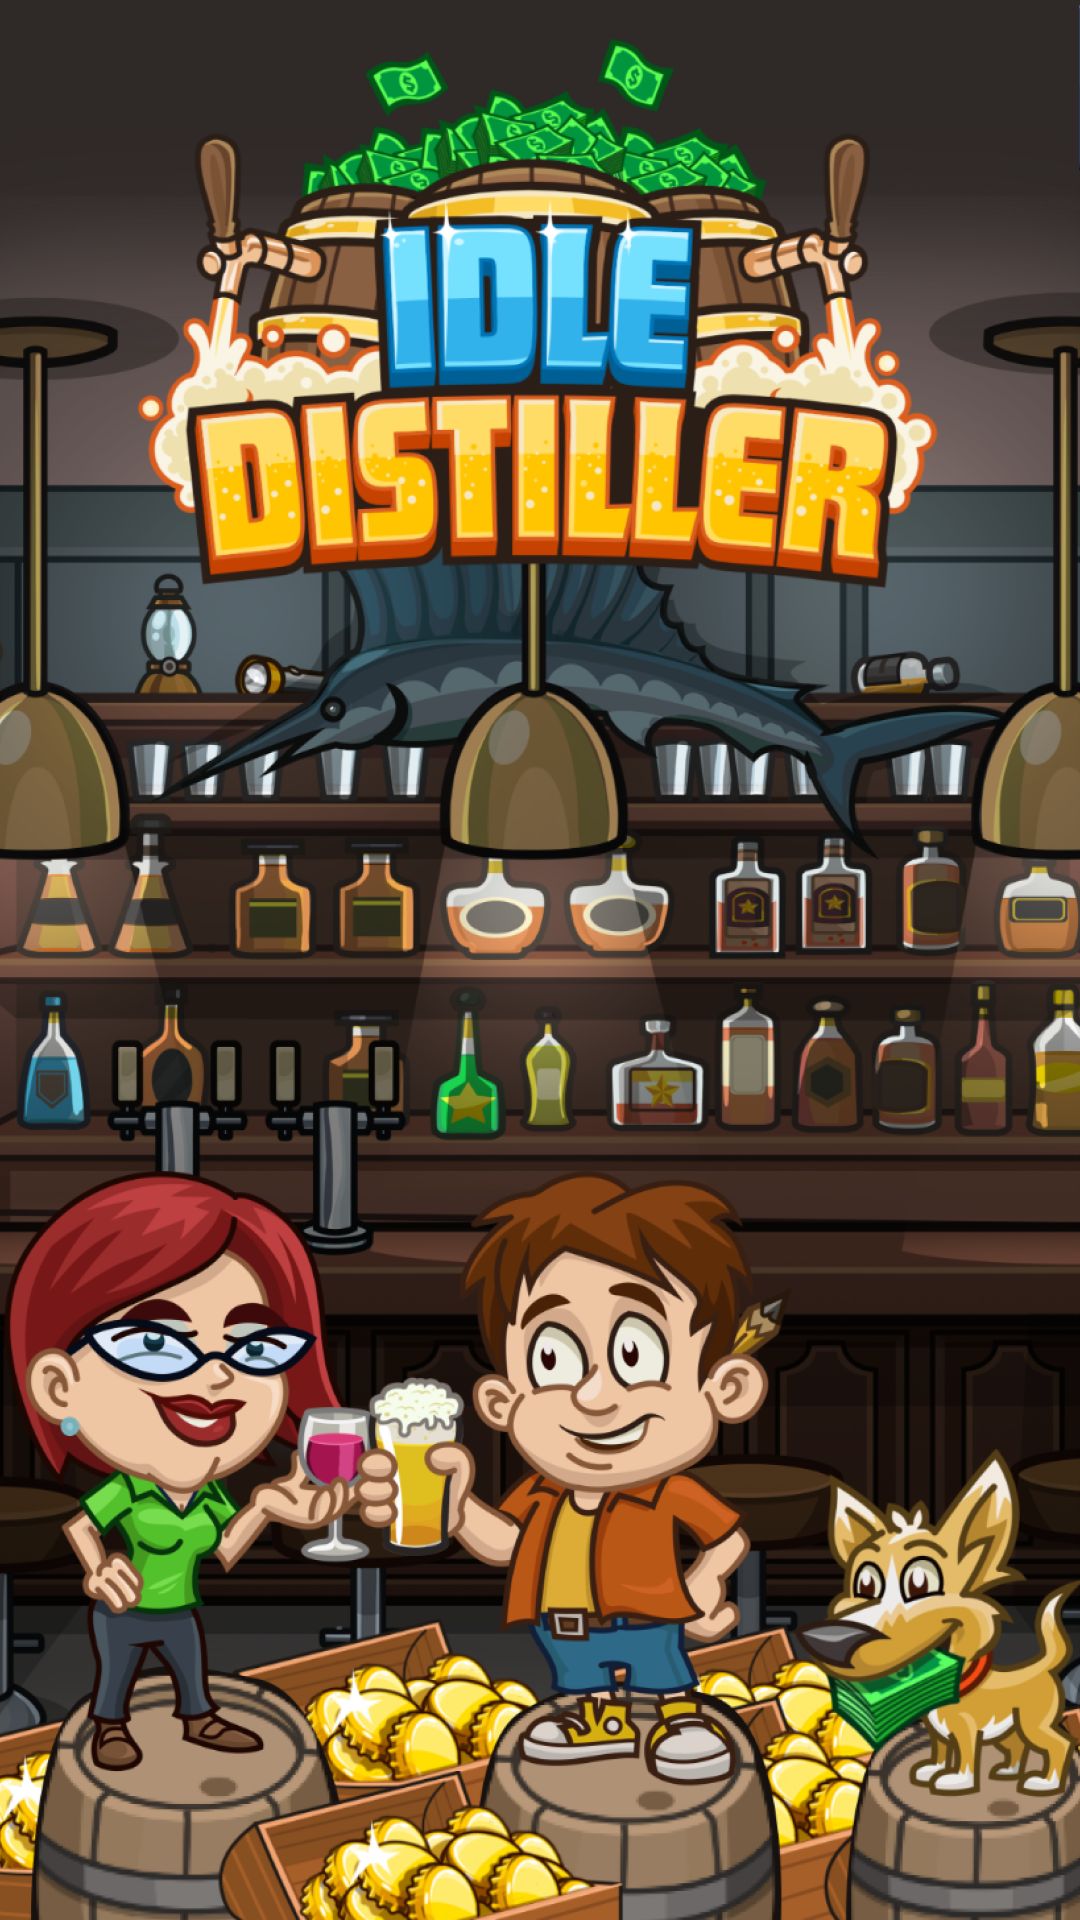 Ladda ner Idle Distiller - A Business Tycoon Game på Android A.n.d.r.o.i.d. .5...0. .a.n.d. .m.o.r.e gratis.